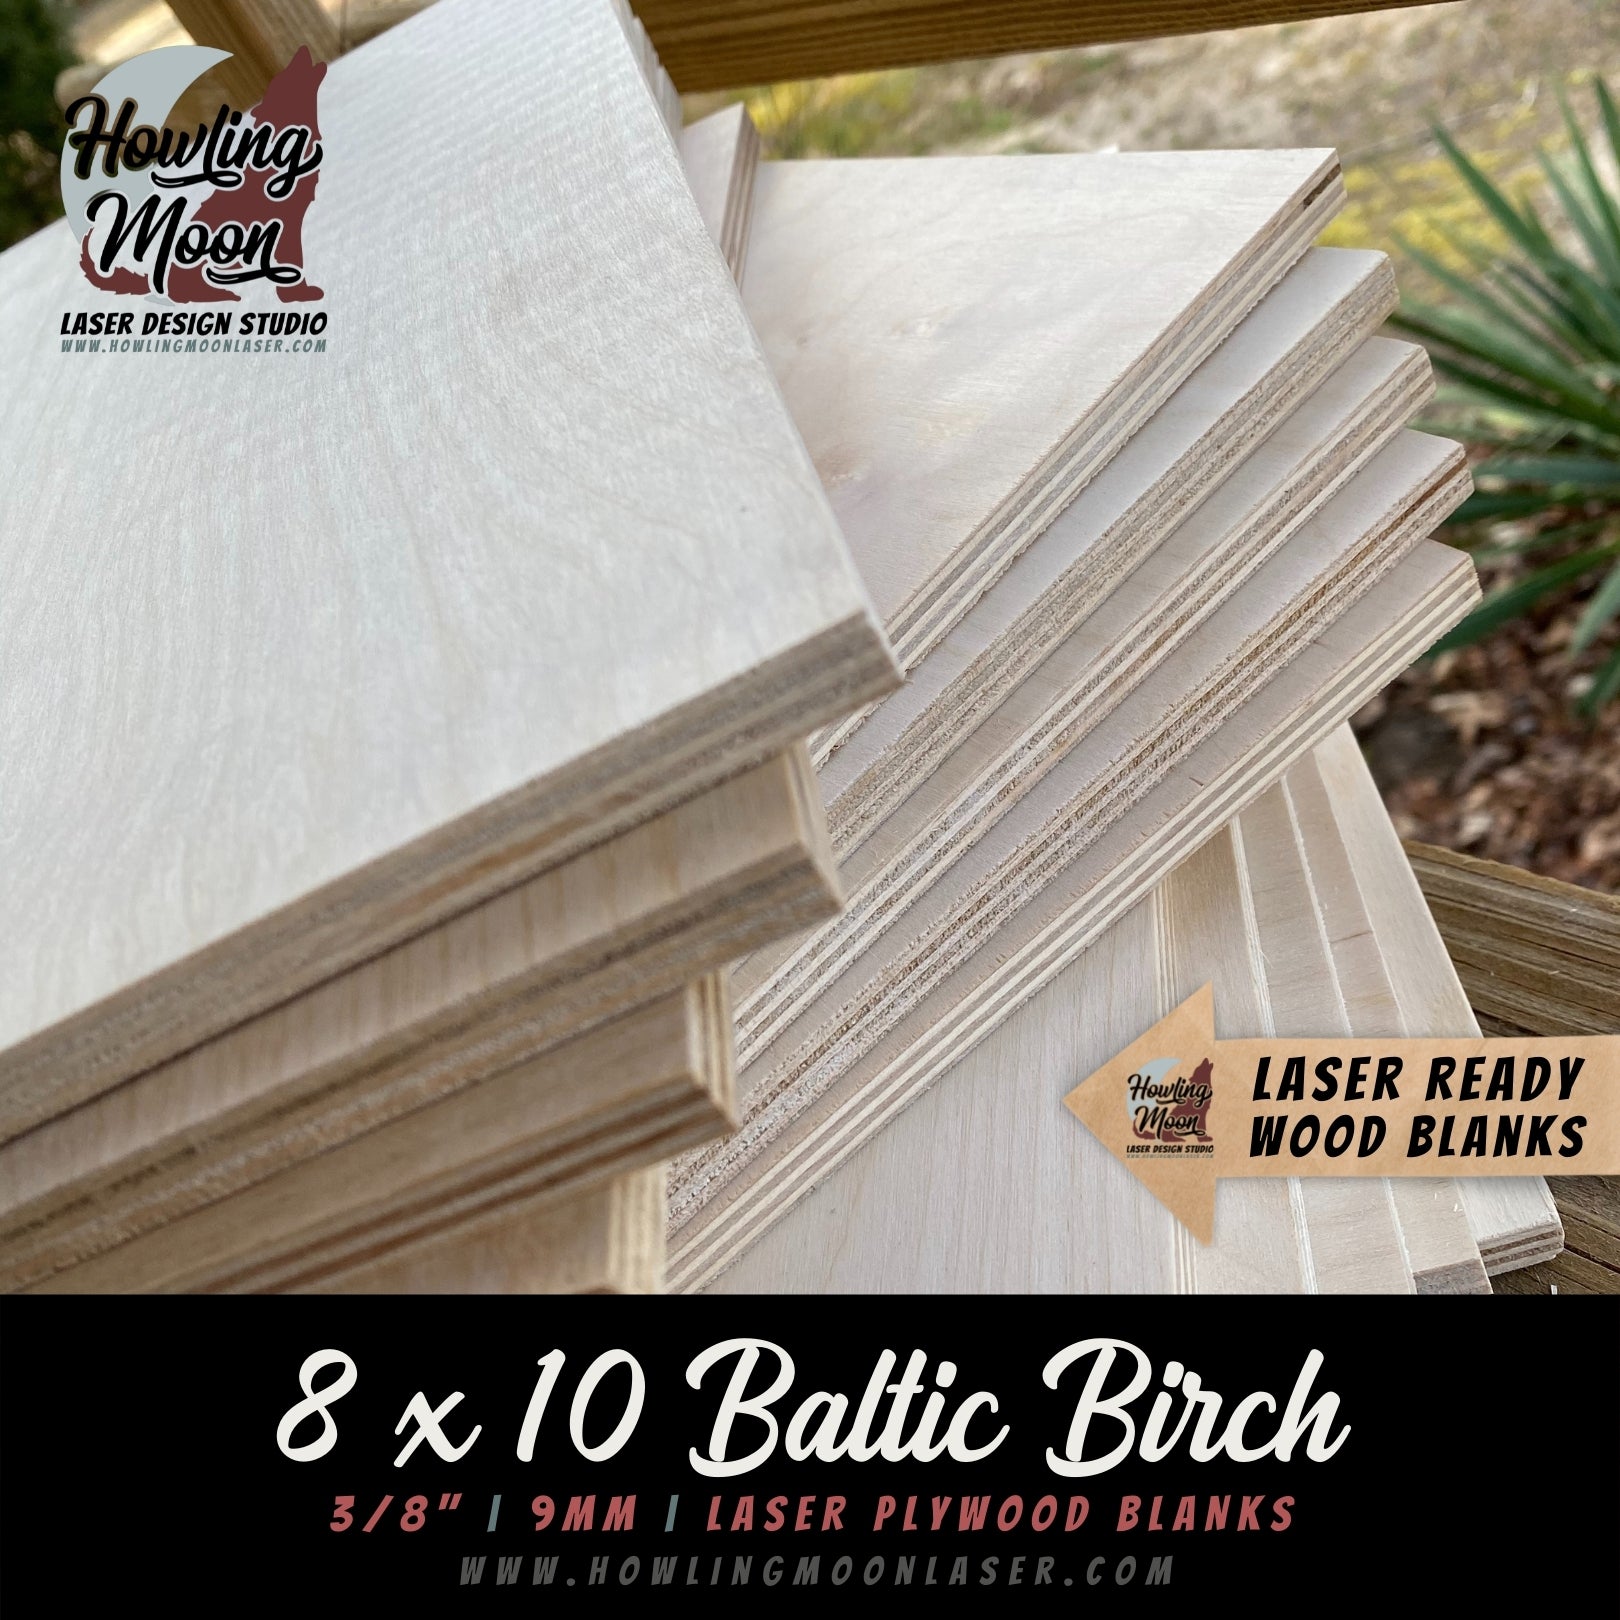 Laser ready wood blanks including these 8 x 10 inch Baltic Birch Plywood Blanks for Laser Engravers, CNC, Crafters from Howling Moon Laser Design Virginia USA